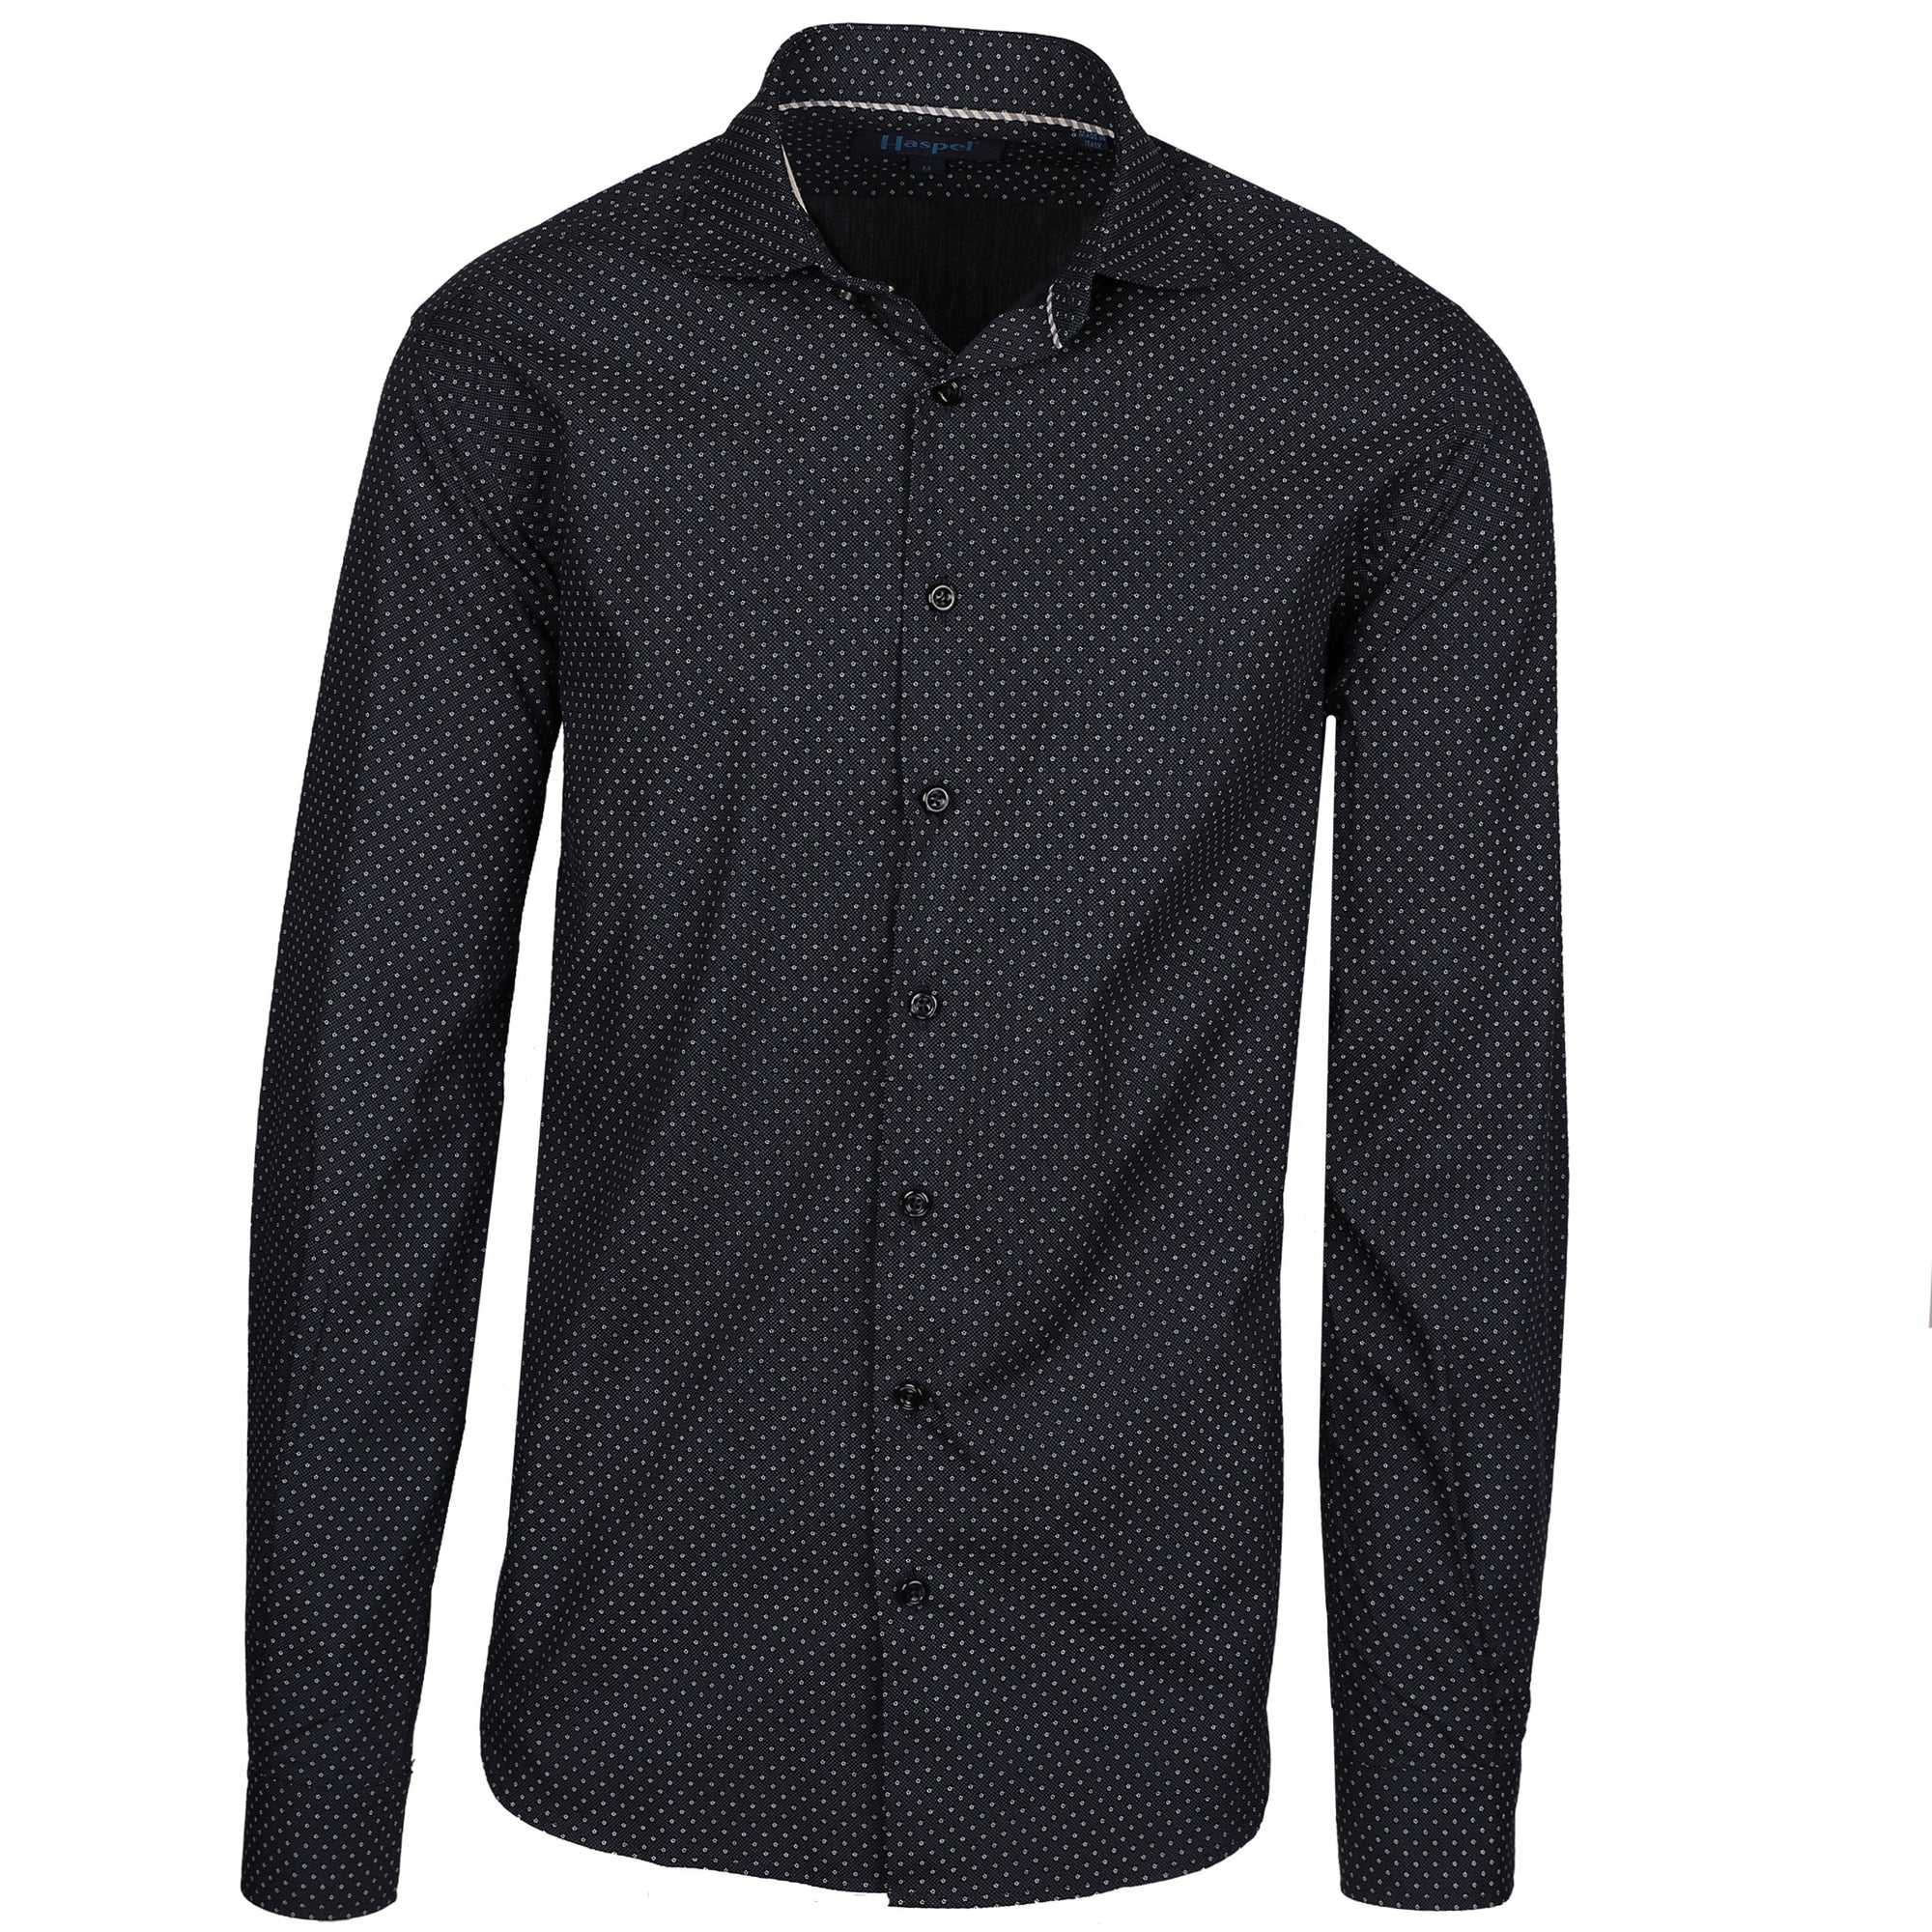 This Erato Navy Texture with White Dot sport shirt will keep you comfortable and stylish. It is made of a soft micro dot patterned material that is breathable and lightweight. You will look sharp while staying cool and comfortable.  100% Cotton • Spread Collar • Long Sleeve • Contrast Buttons • French Placket • Machine Washable • Made in Italy • Return Policy